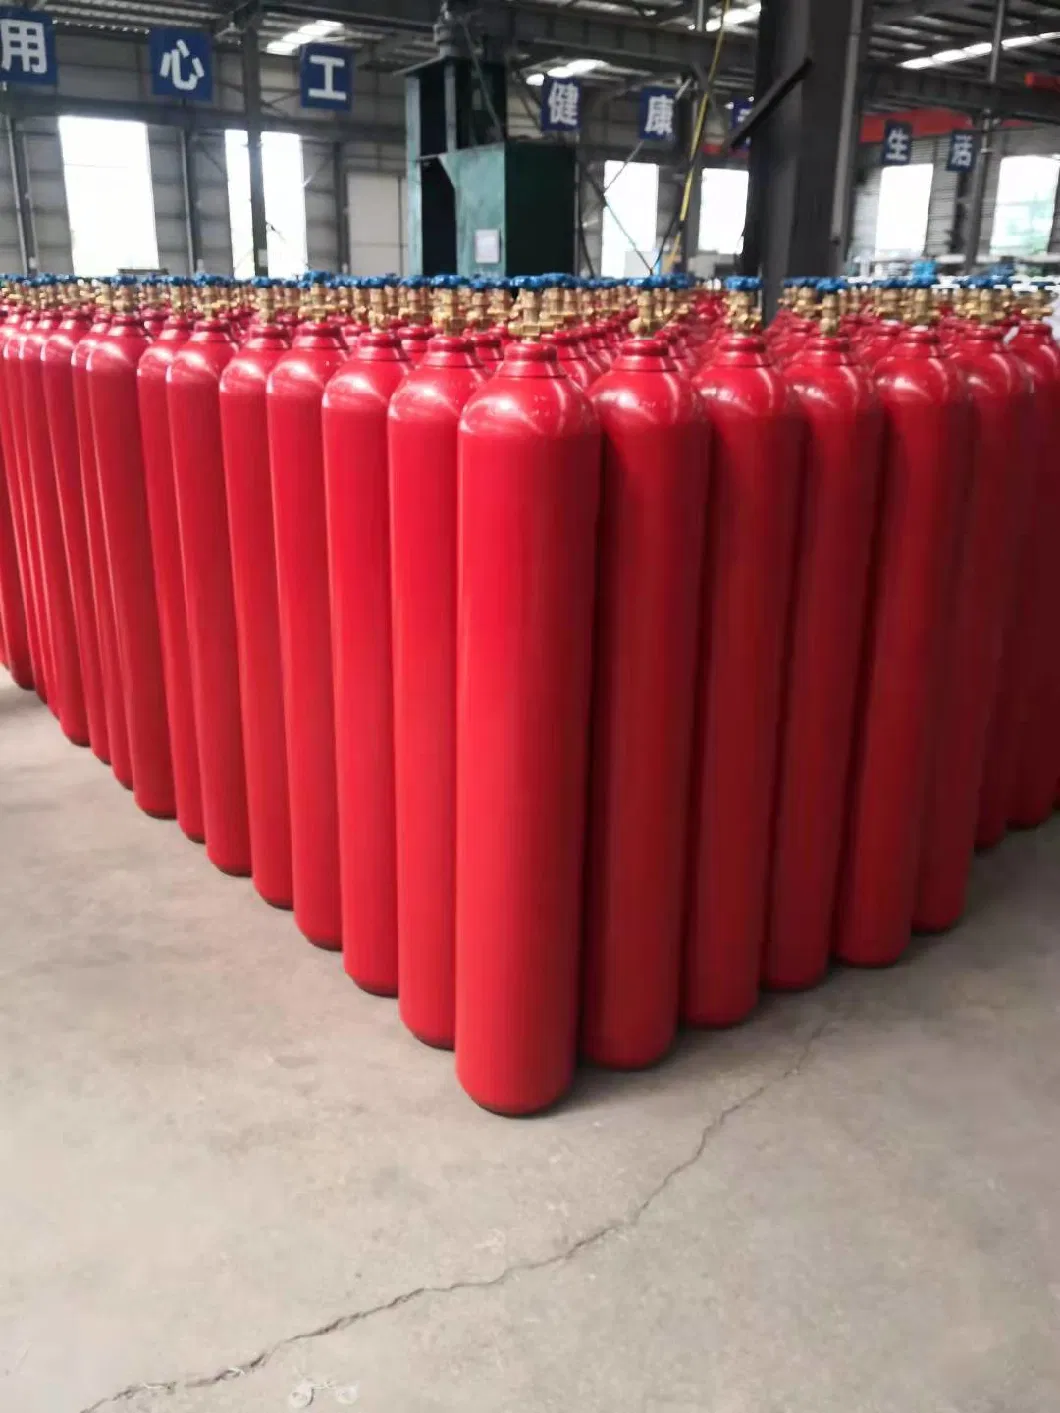 70L ISO9809-1 Ya Dairy Machine CO2 Cylinder Fire Extinguisher with Good Price